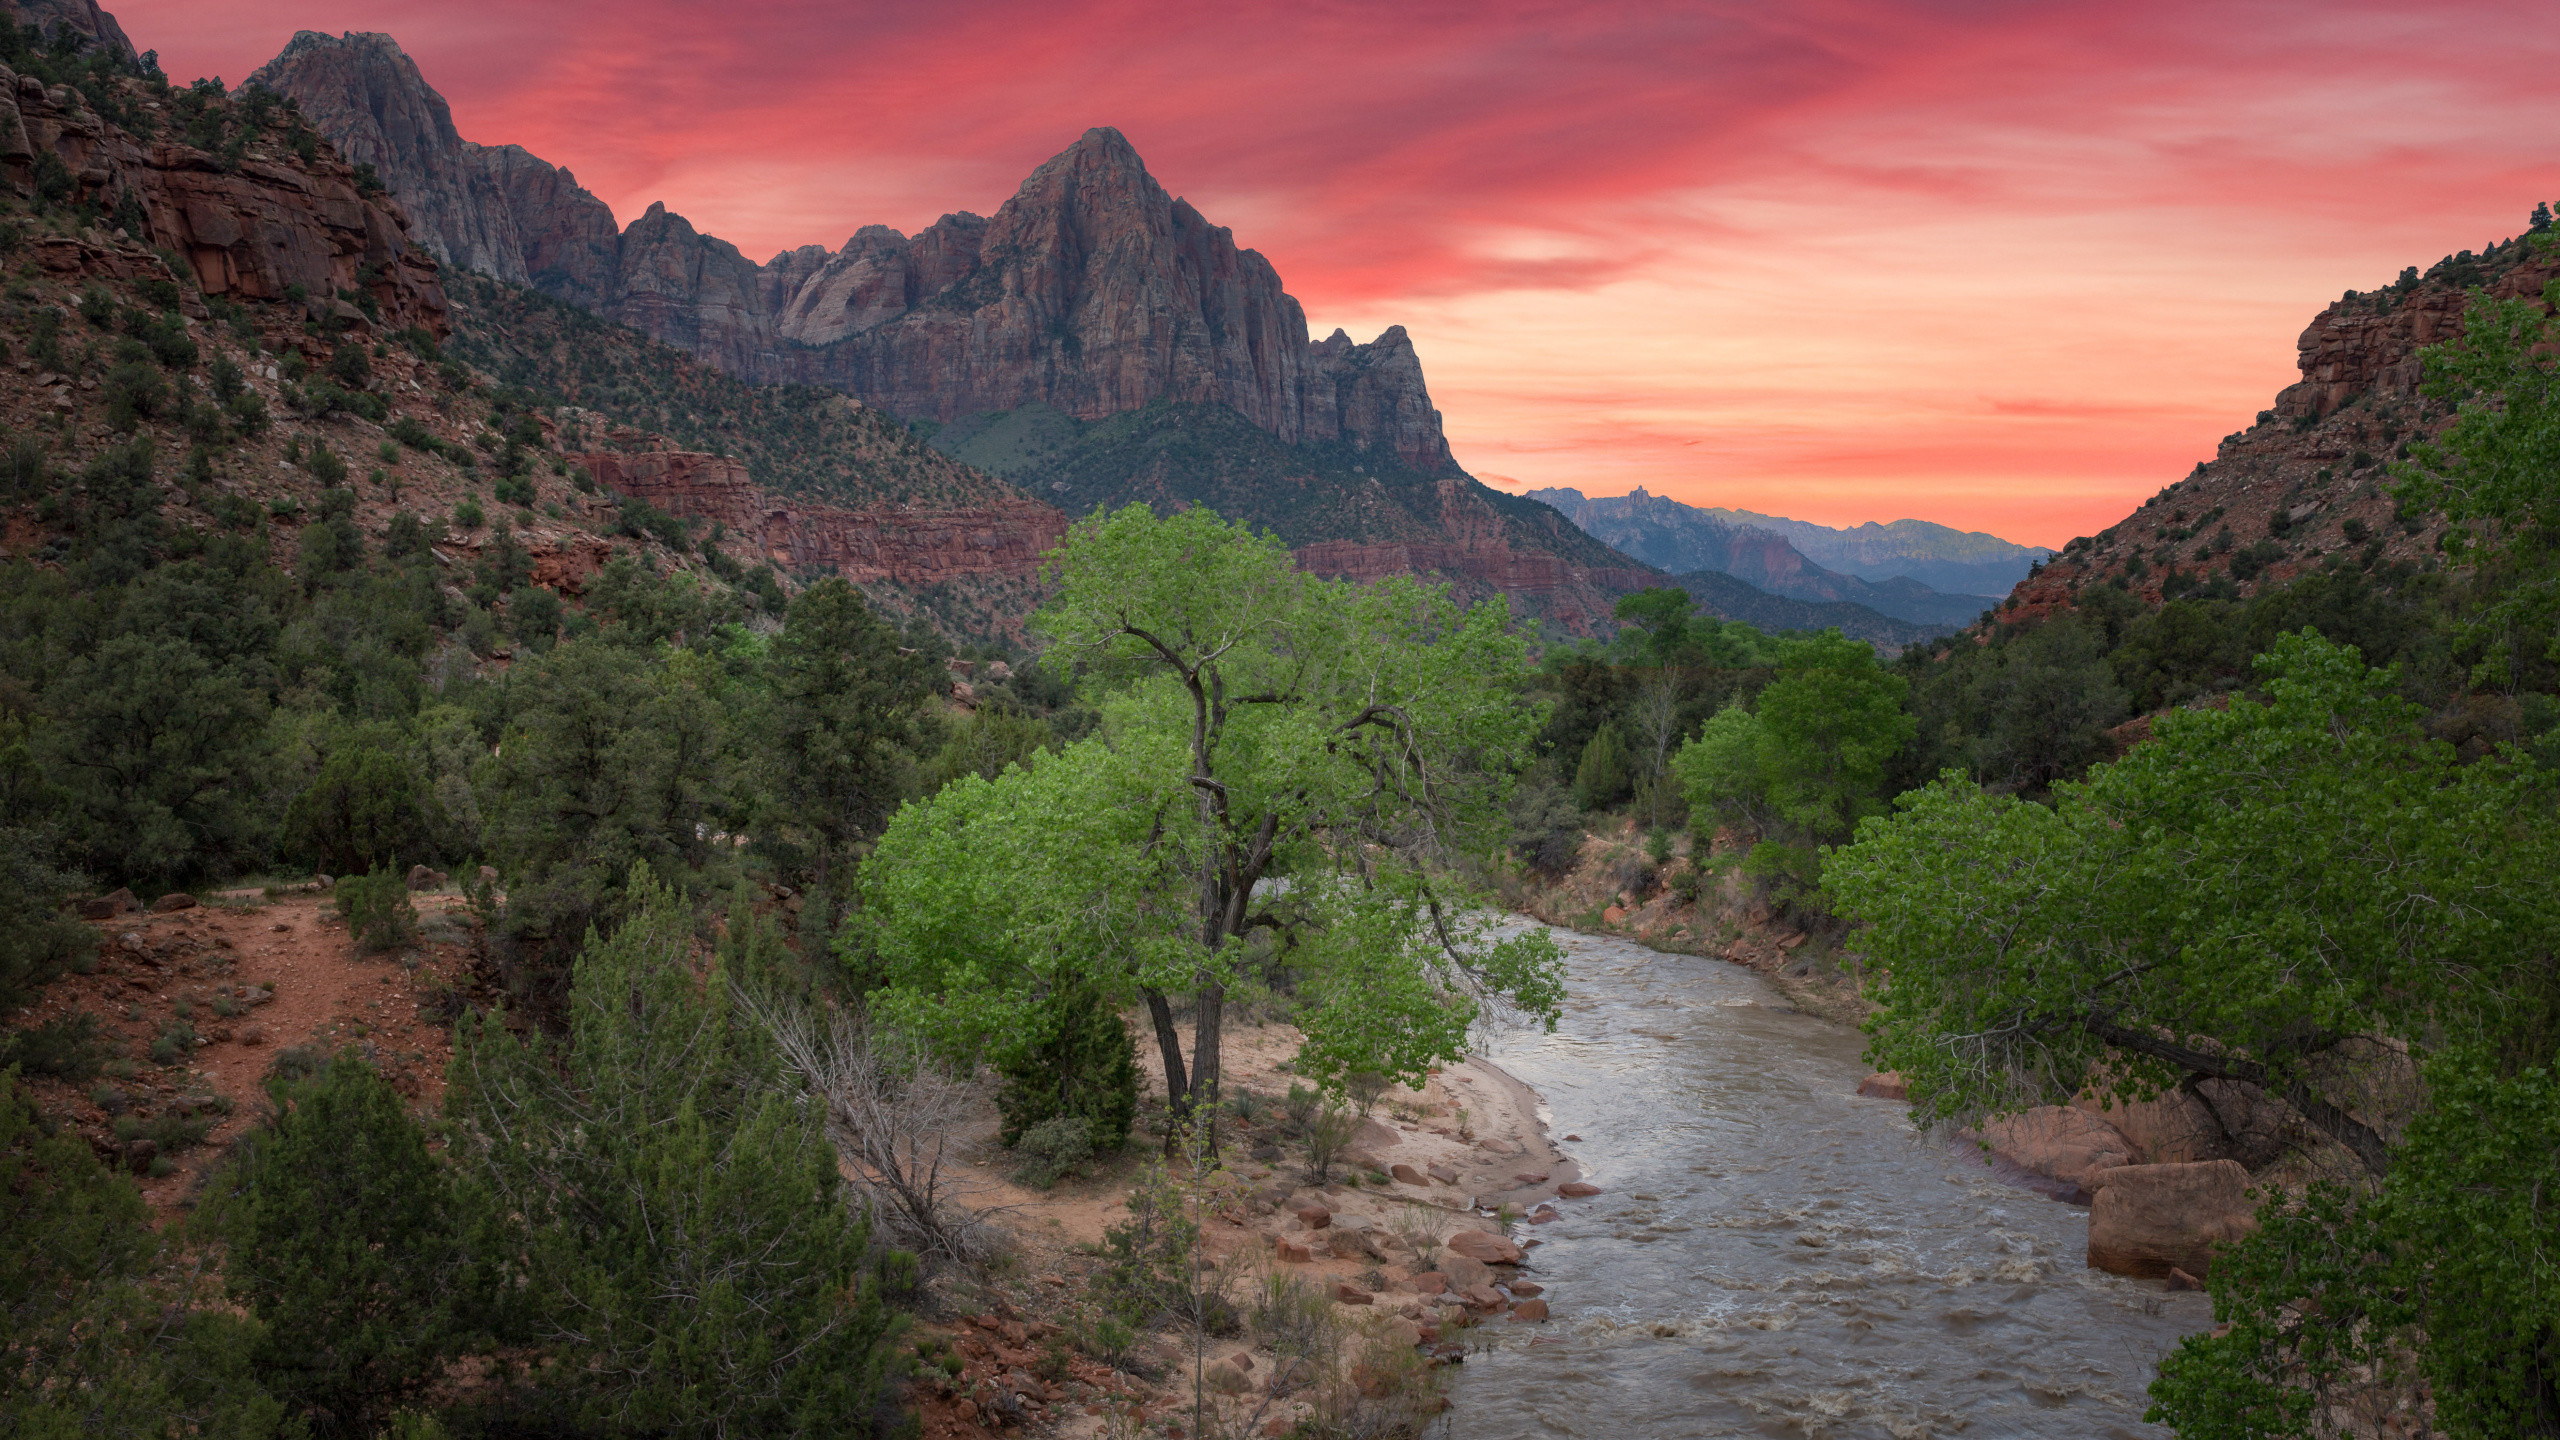 2560x1440  wallpaper The watchman at Zion national park